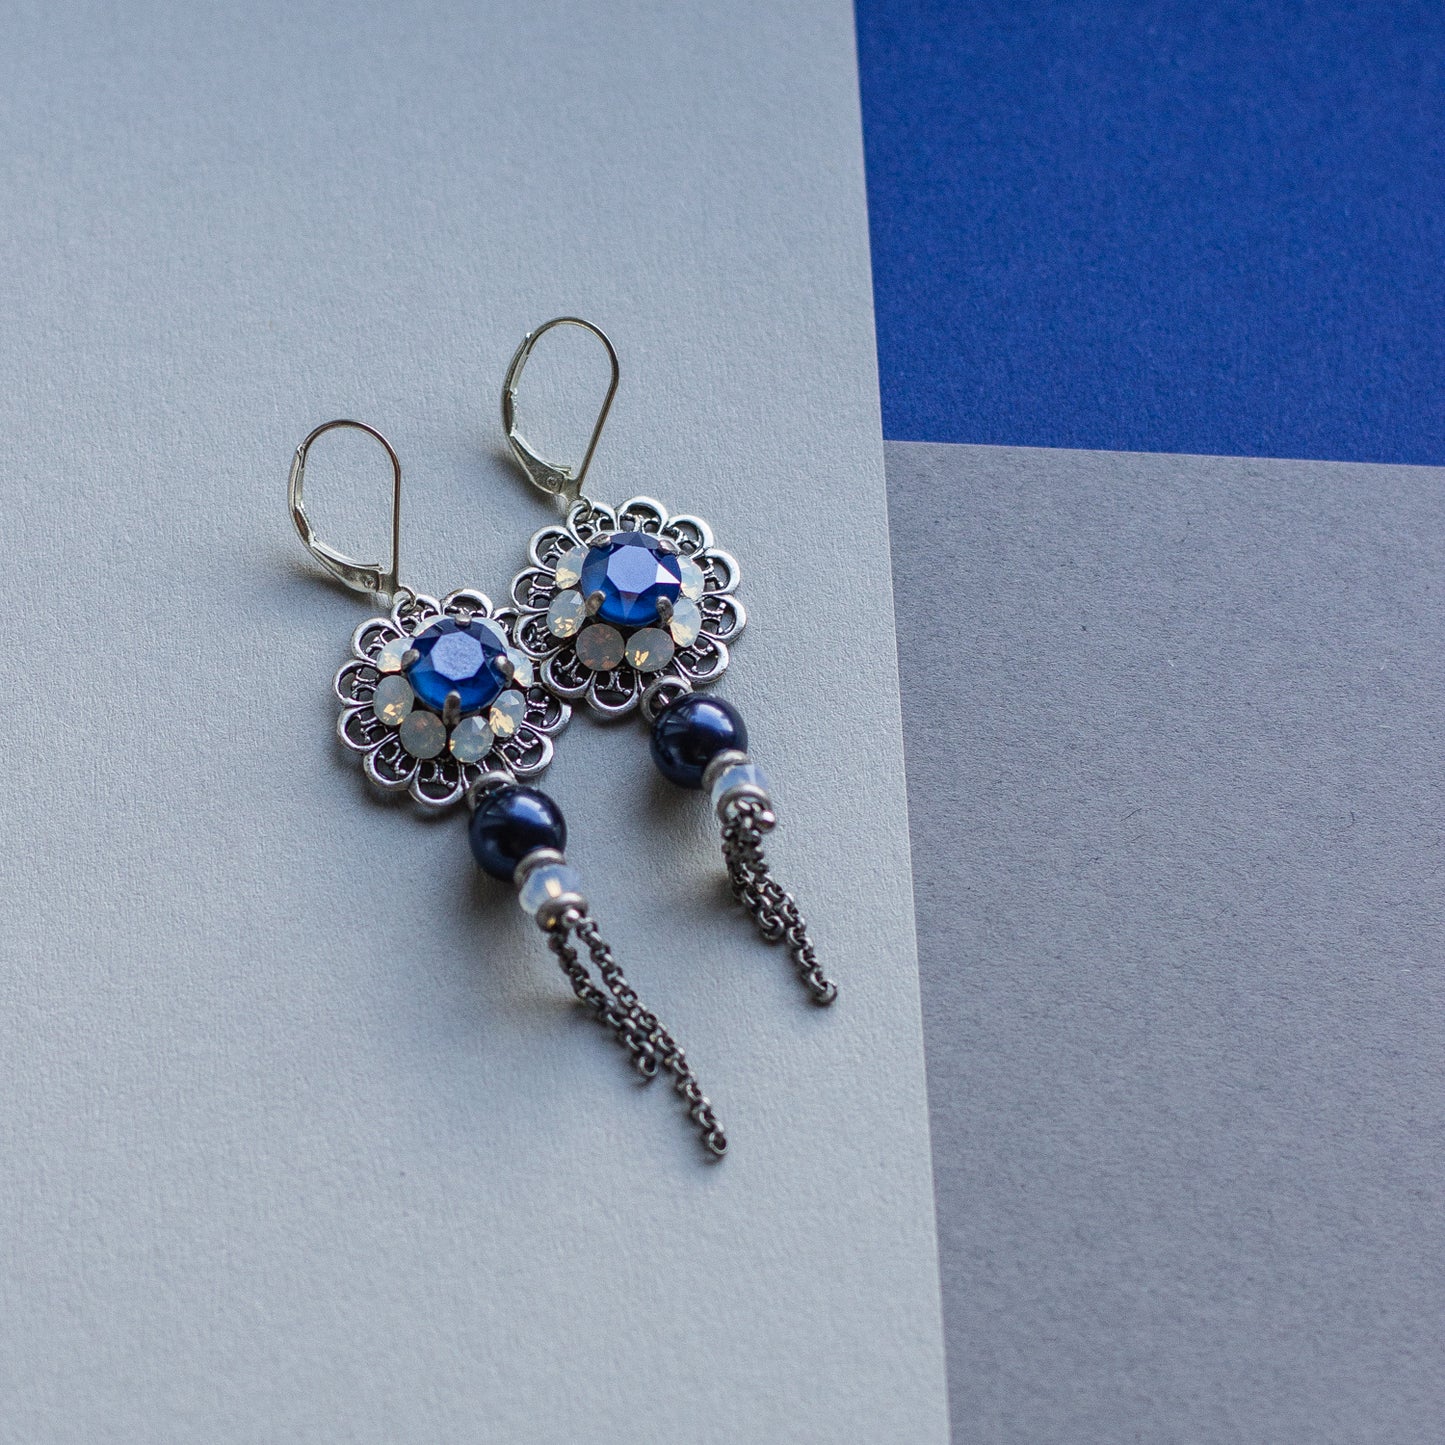 These earrings feature intricate filigree details in royal blue and silver, accented by shiny Swarovski crystals. They make a perfect gift for any occasion.